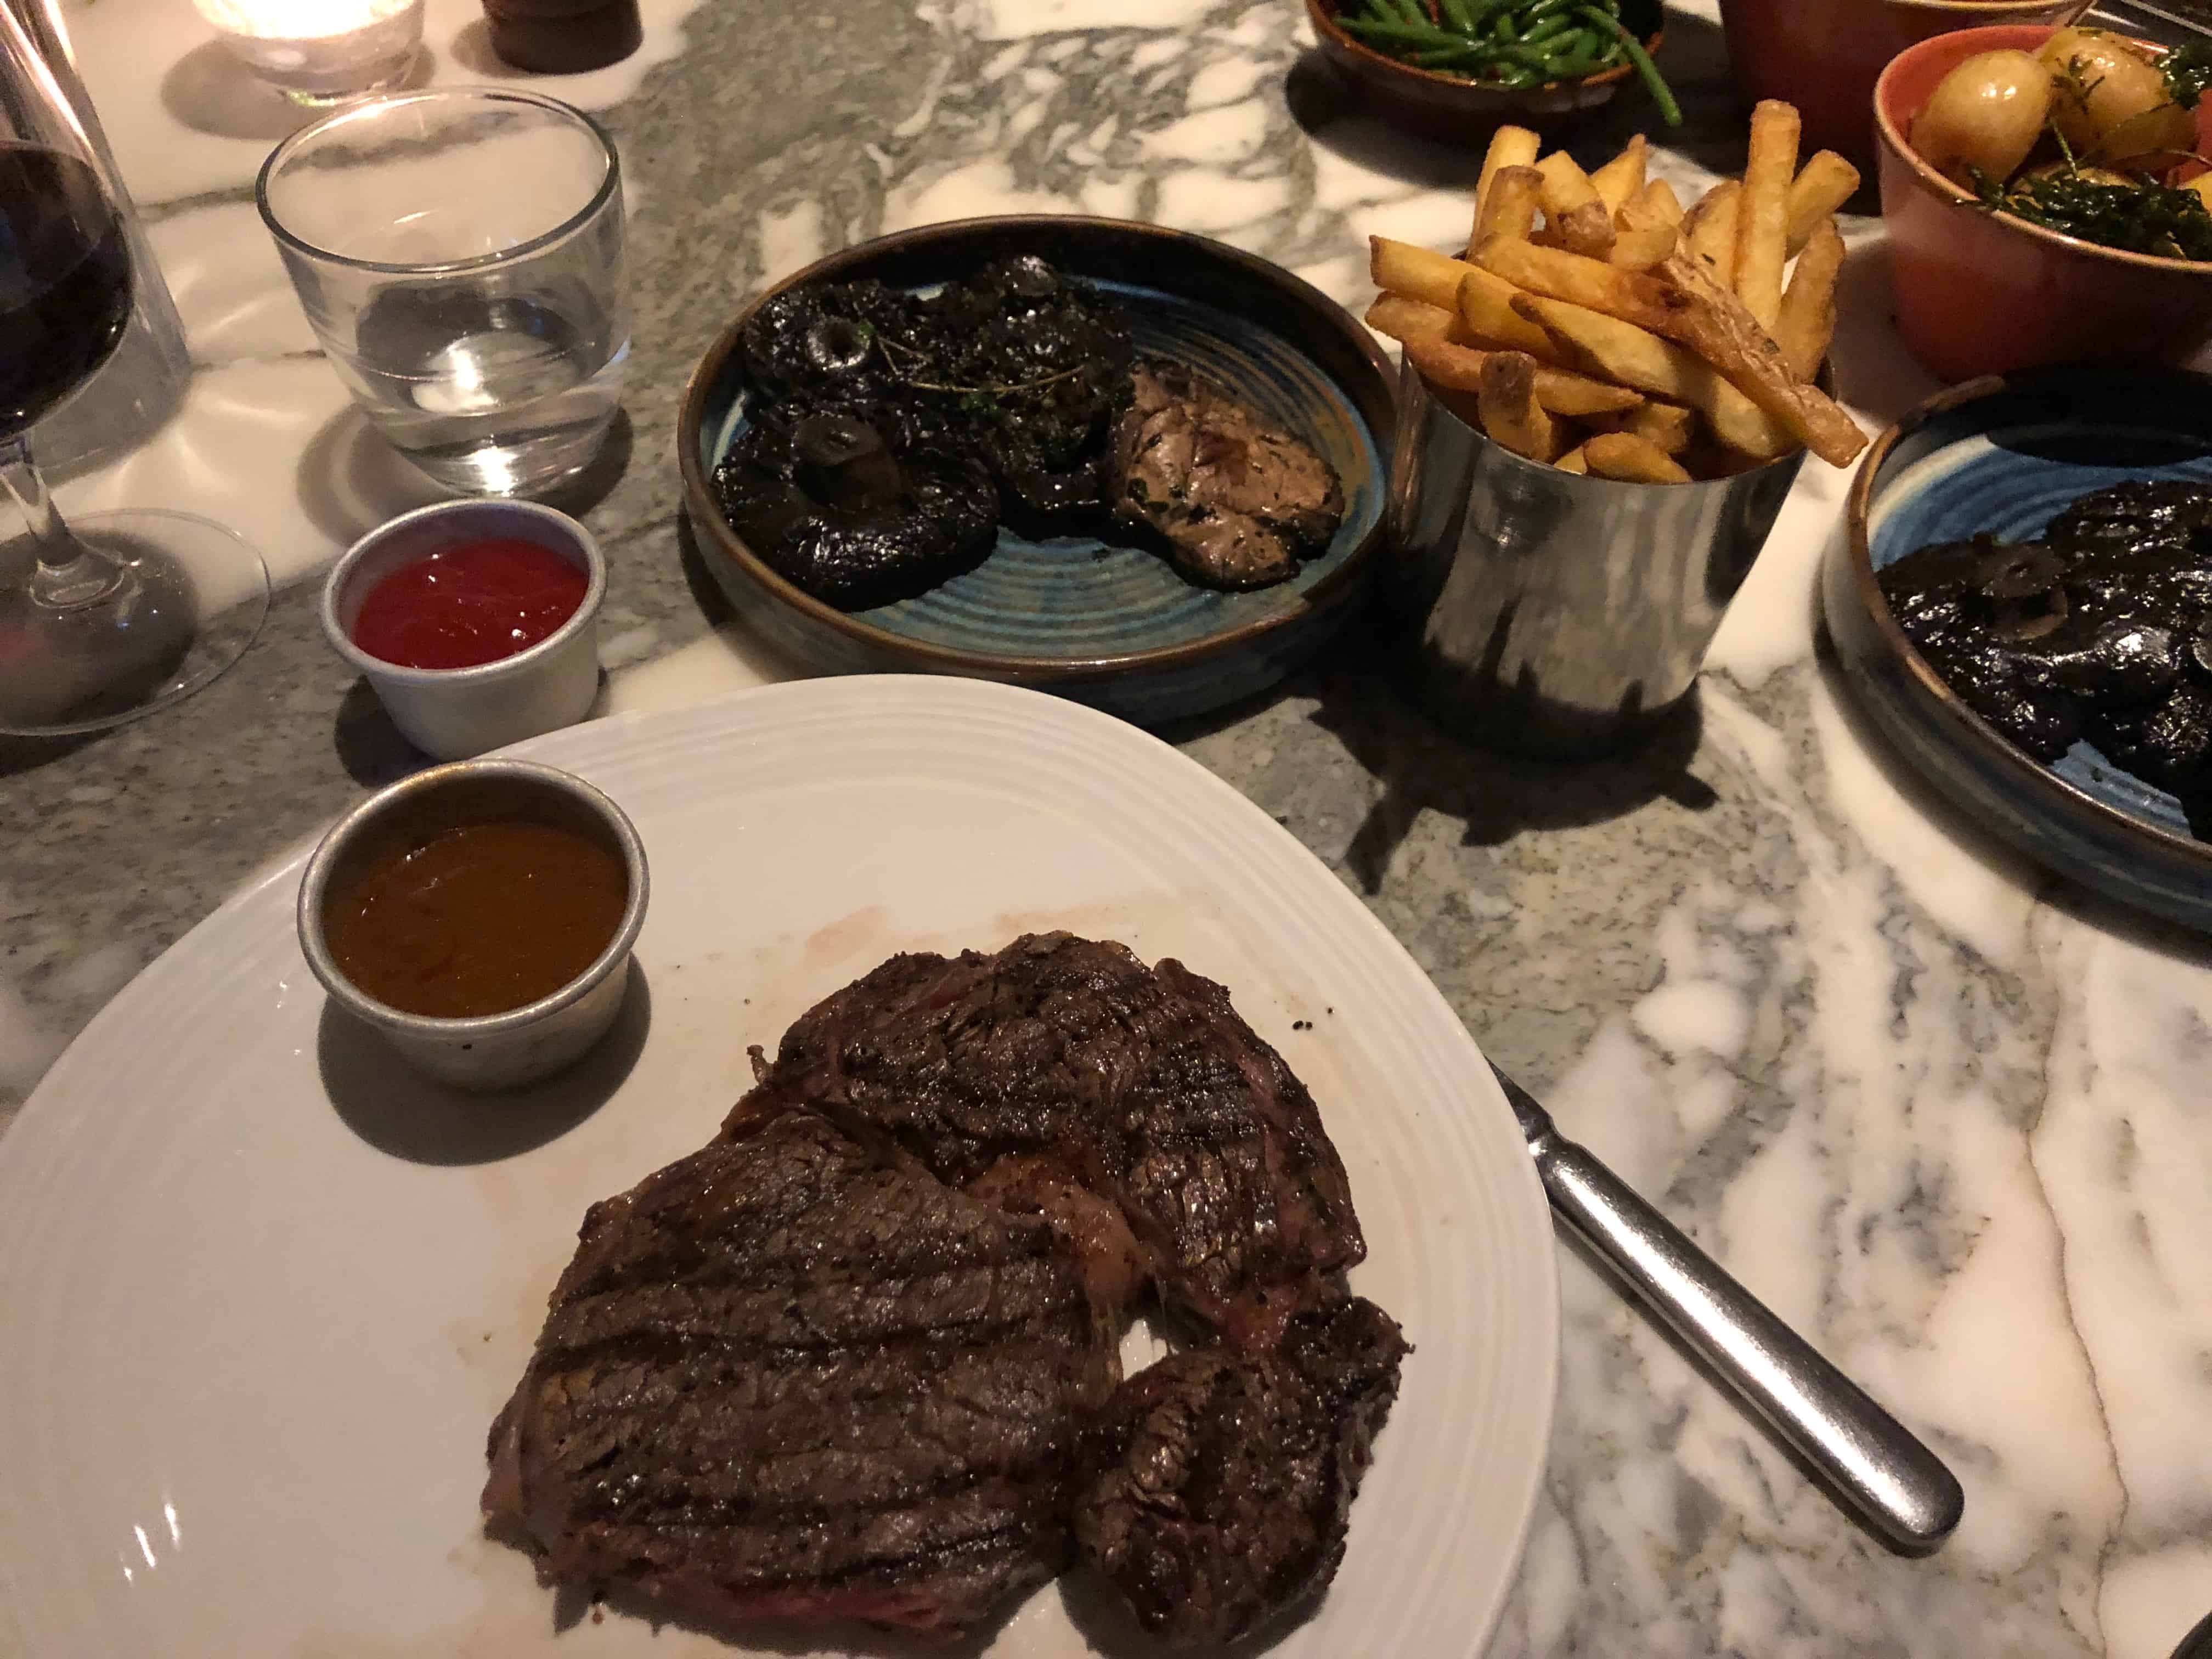 Steak and sides at Sophie's Soho